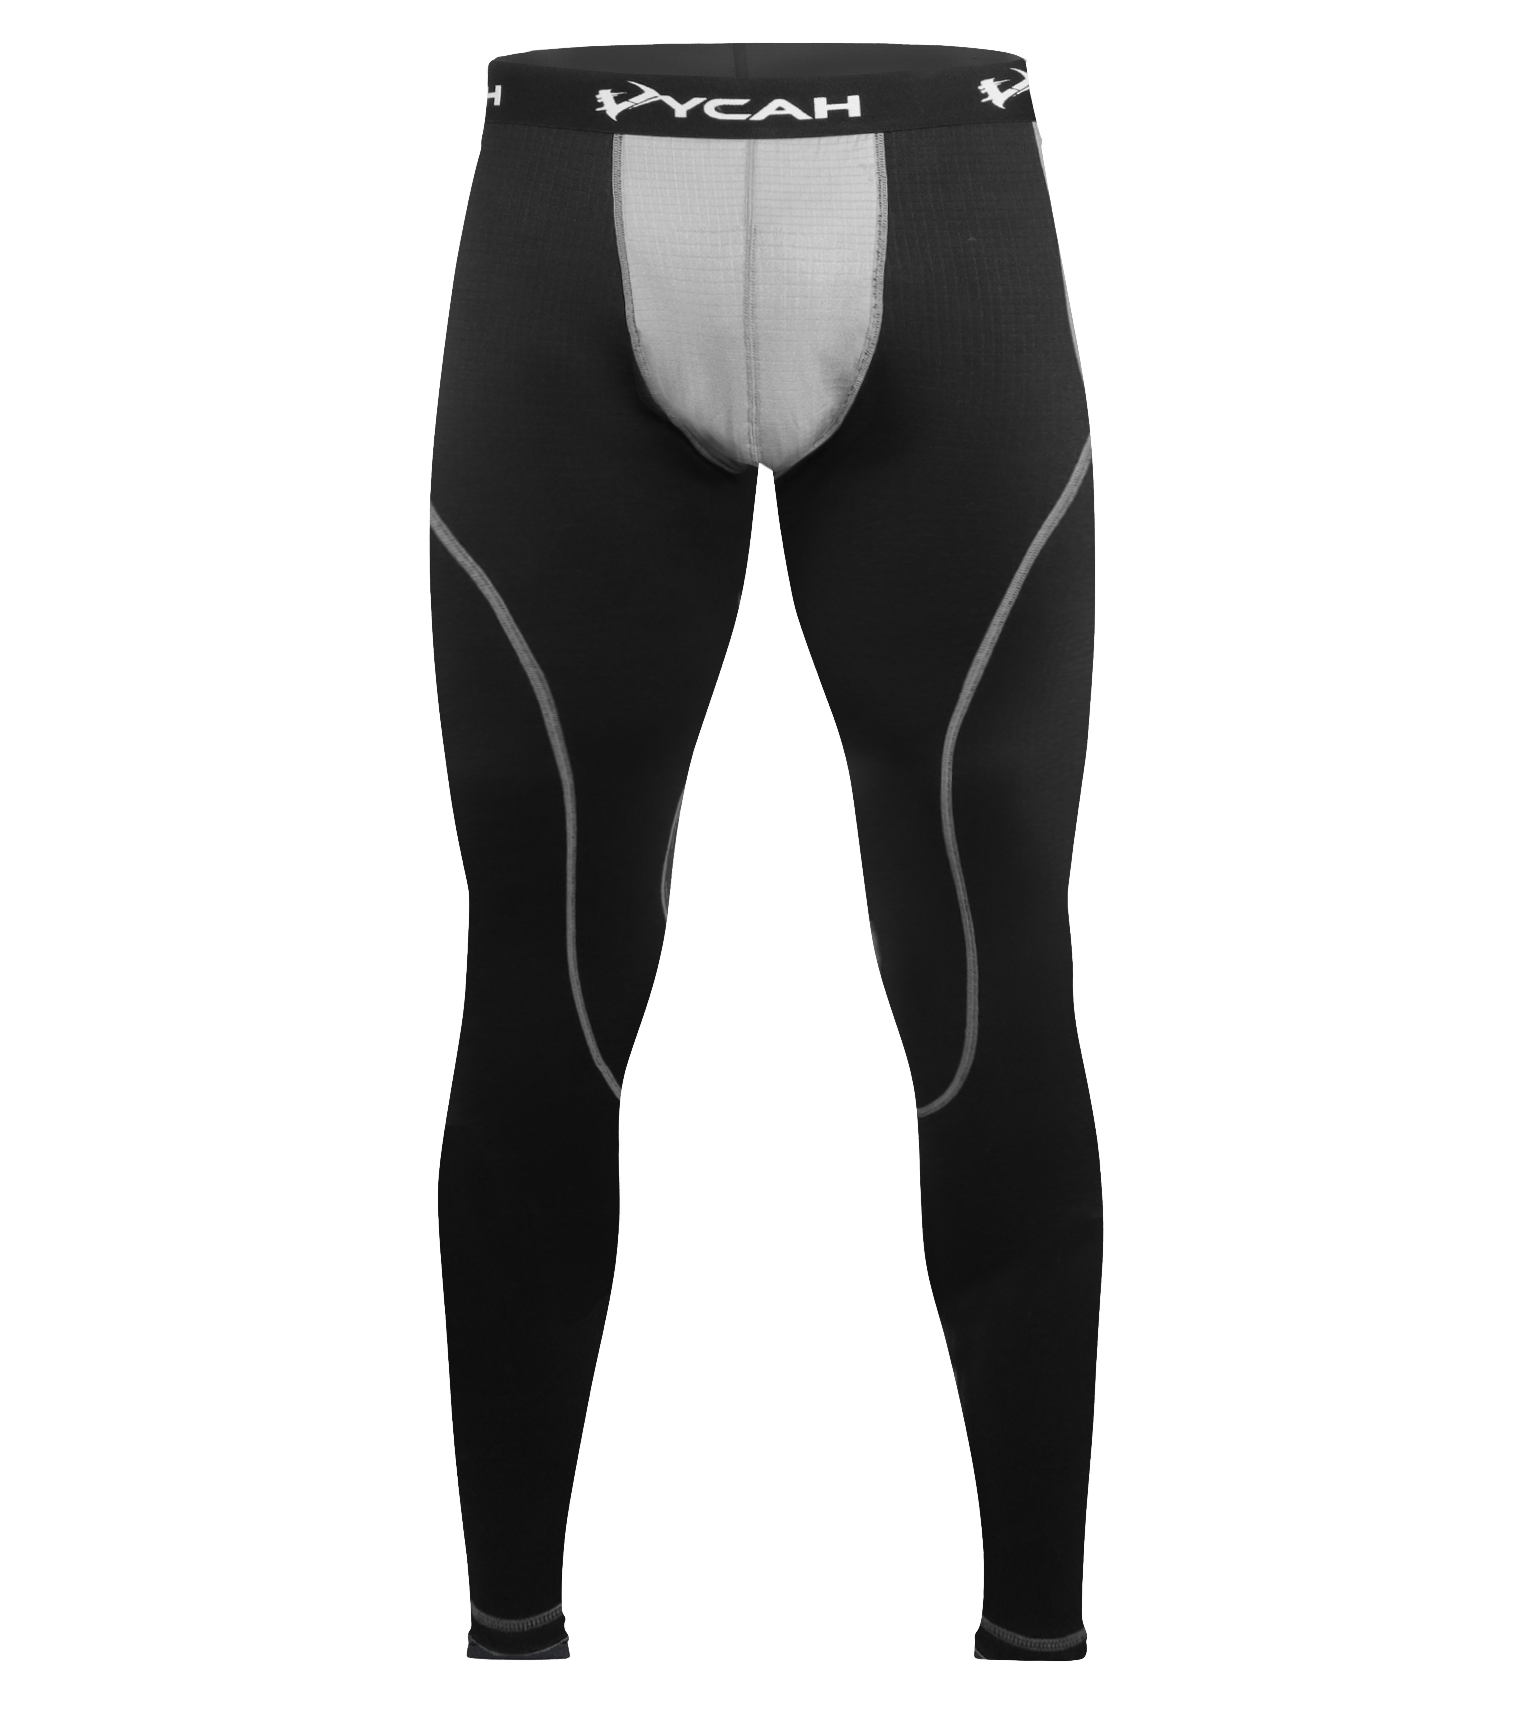 pyrex-extreme-pants-gray-black_Clear.png?v=1661463363